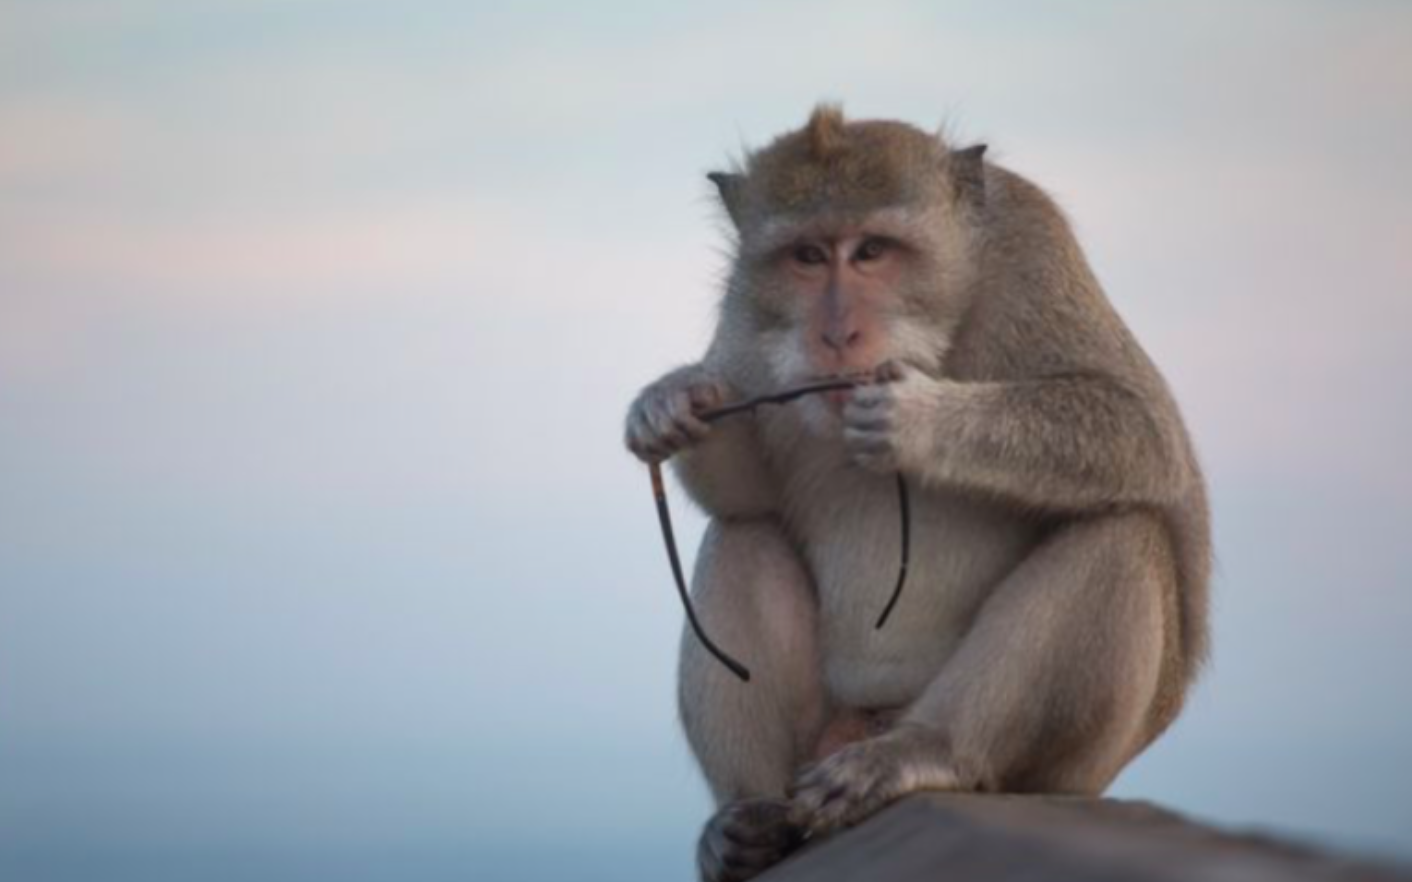 Monkey menace: where does the solution lie?